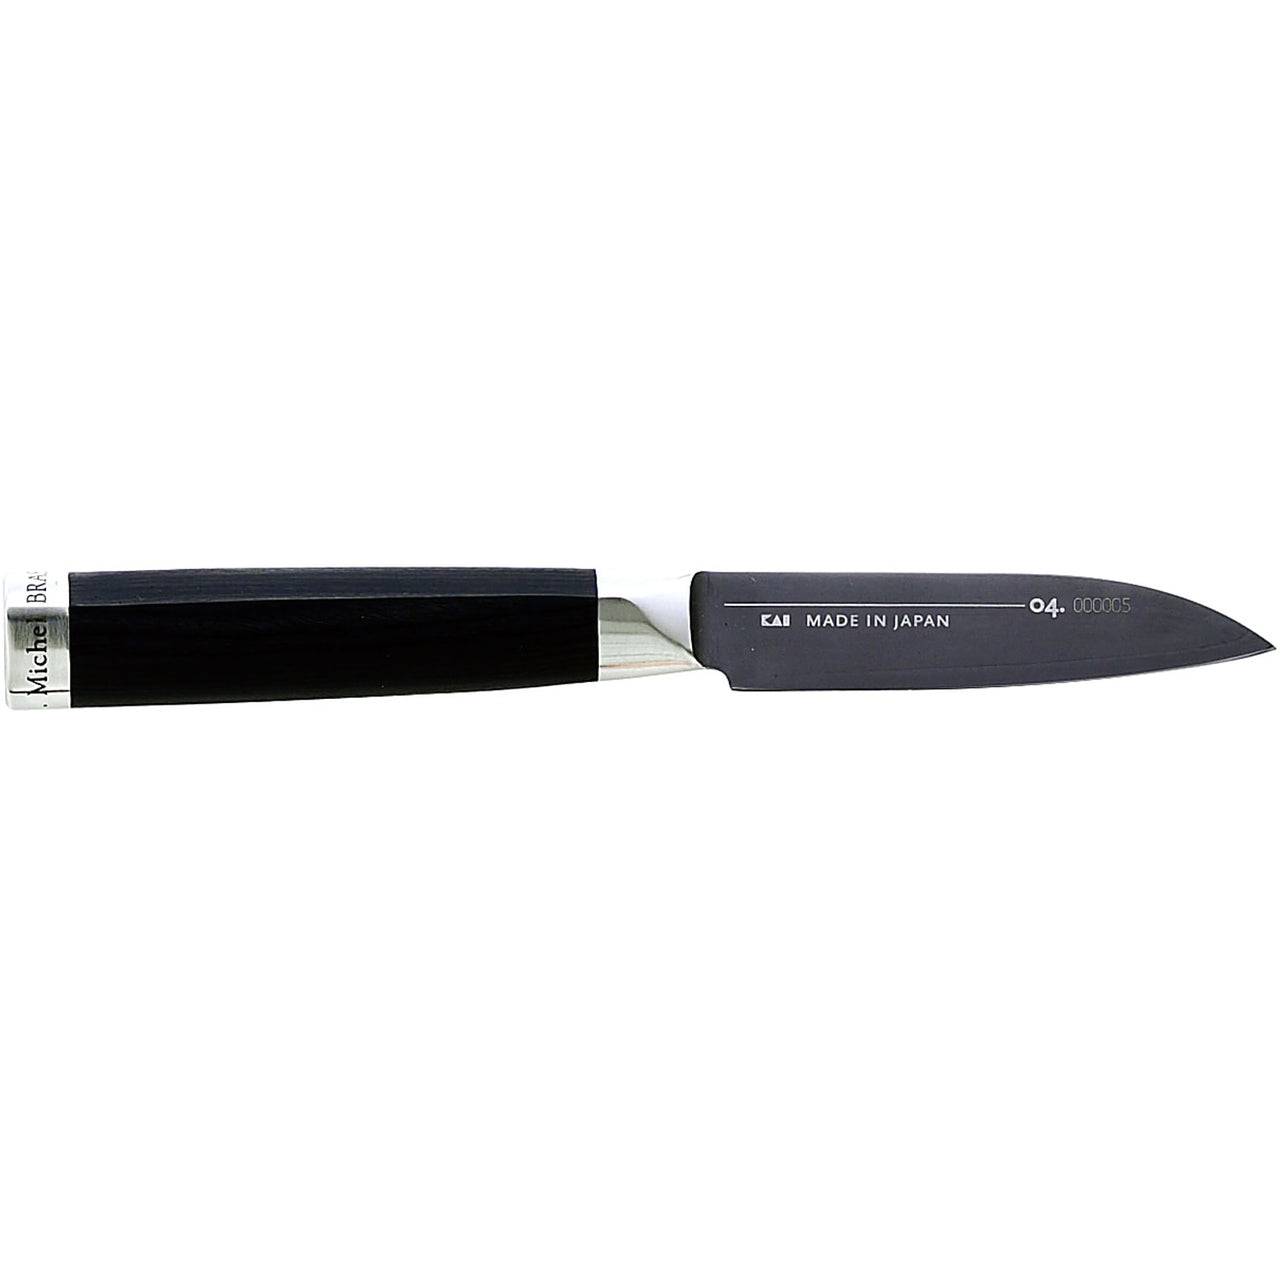 Image of ID 932742046 Michel Bras #1 Paring Knife 3-in